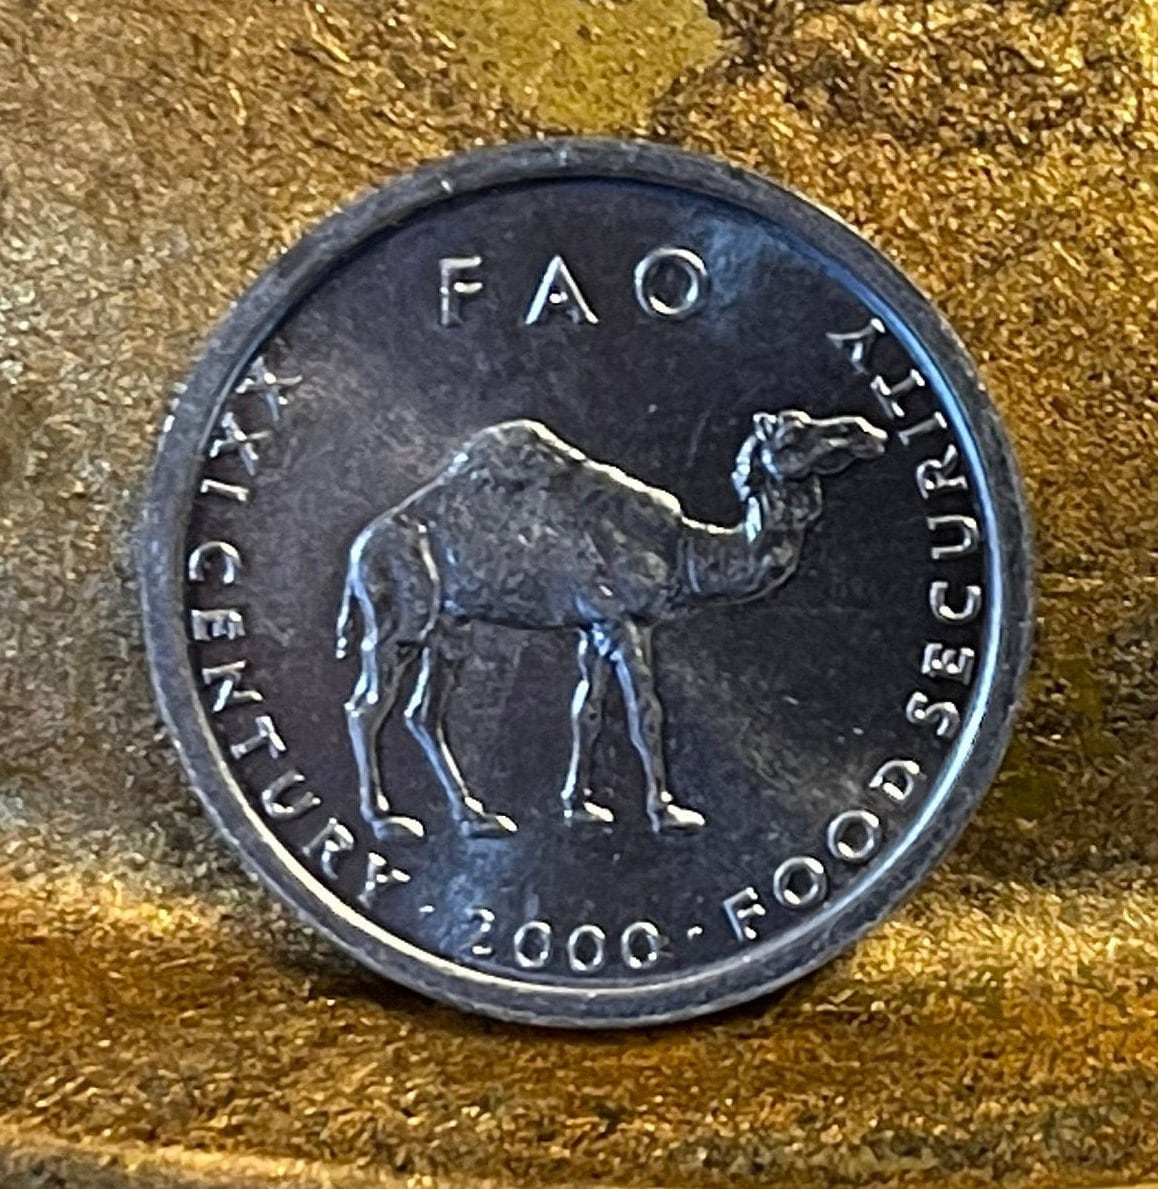 Camel Somalia 10 Shillings Authentic Coin Money for Jewelry and Craft Making